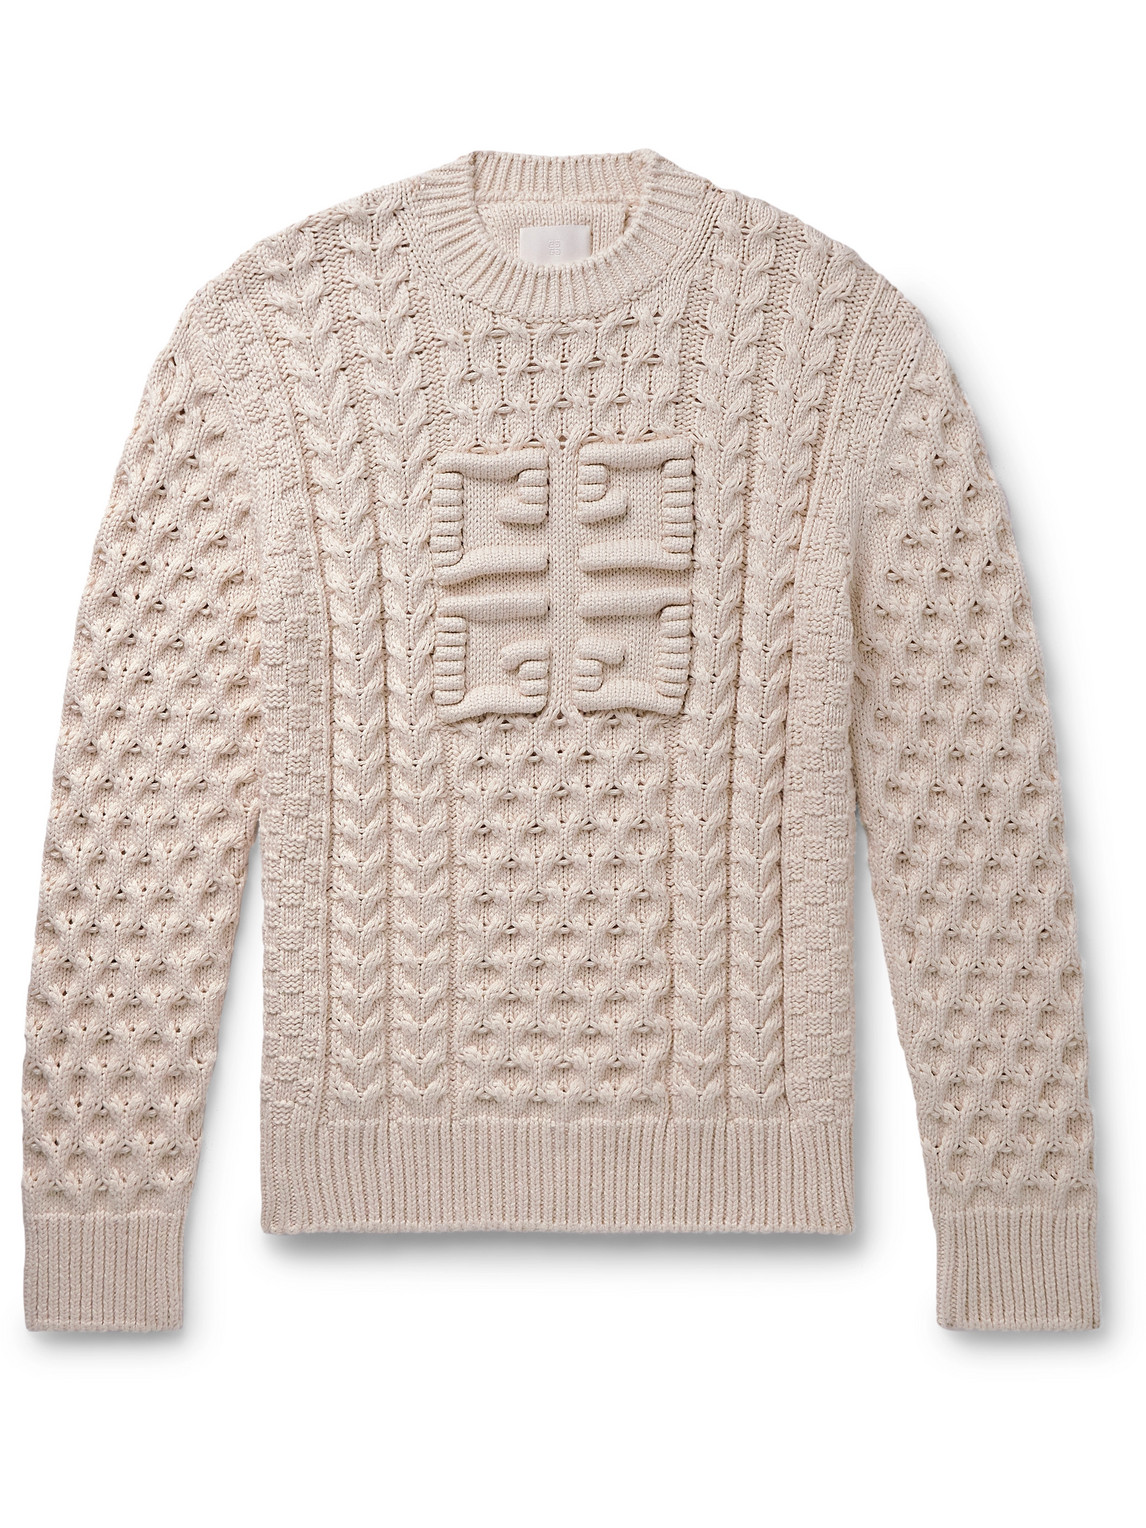 GIVENCHY LOGO-JACQUARD CABLE-KNIT COTTON-BLEND SWEATER